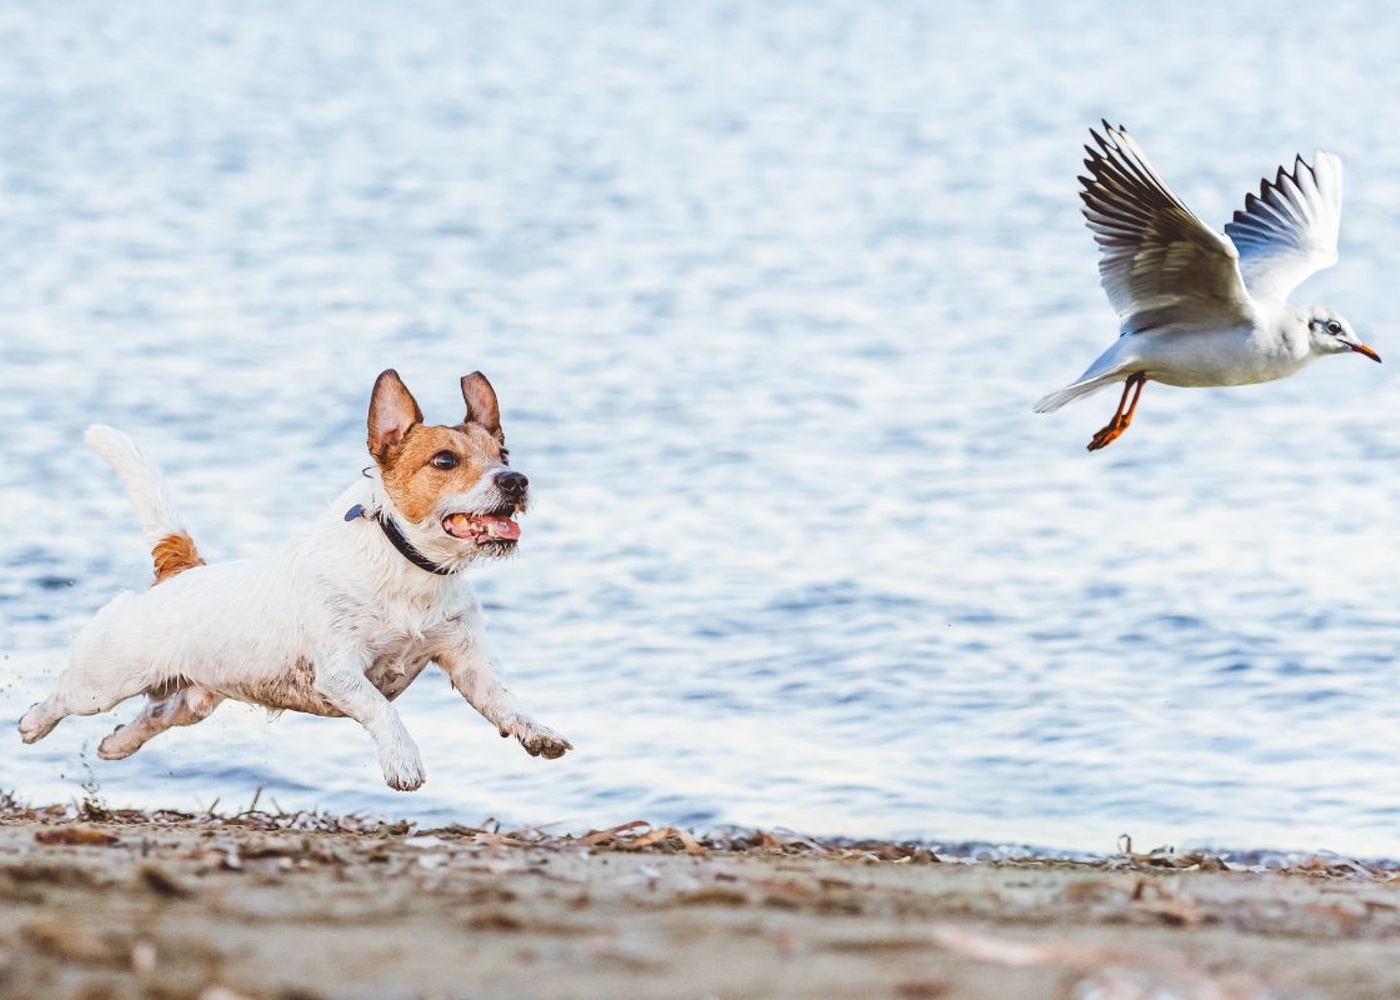 A dog chasing after a seagull following a successful dog training session from Dog Training Elite in Sarasota / Venice, FL.